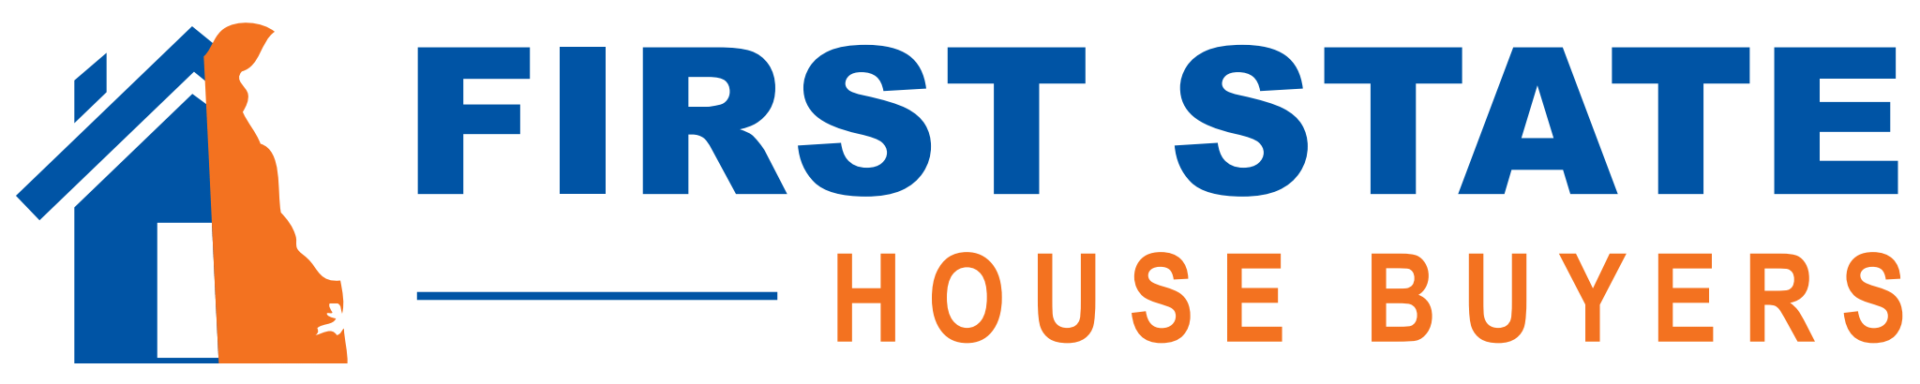 First State House Buyers  logo